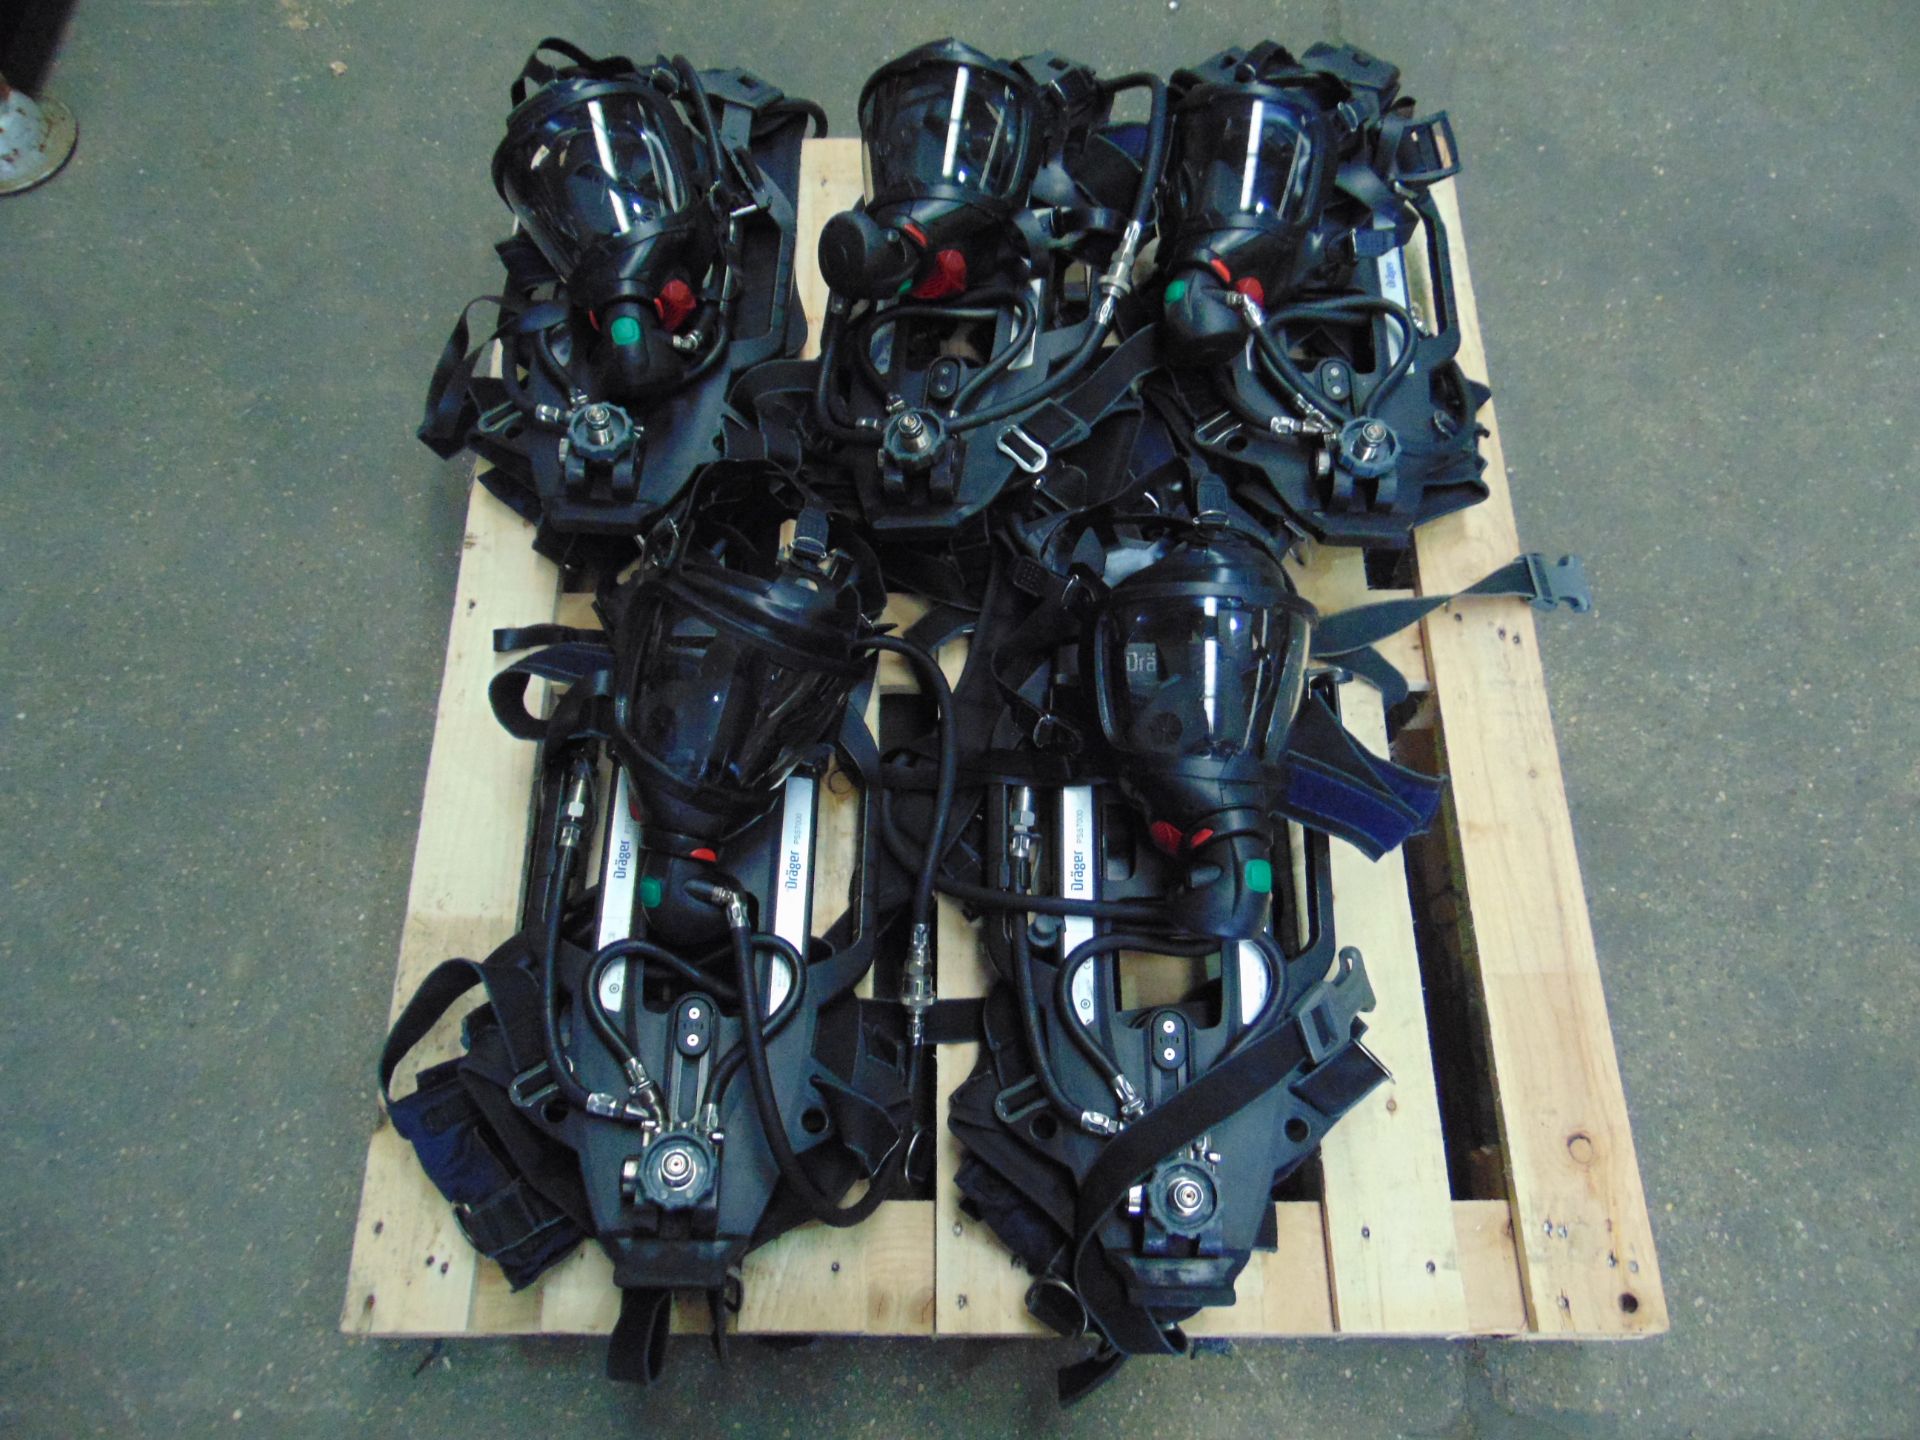 5 x Drager PSS 7000 Self Contained Breathing Apparatus w/ 10 x Drager 300 Bar Air Cylinders - Image 7 of 22